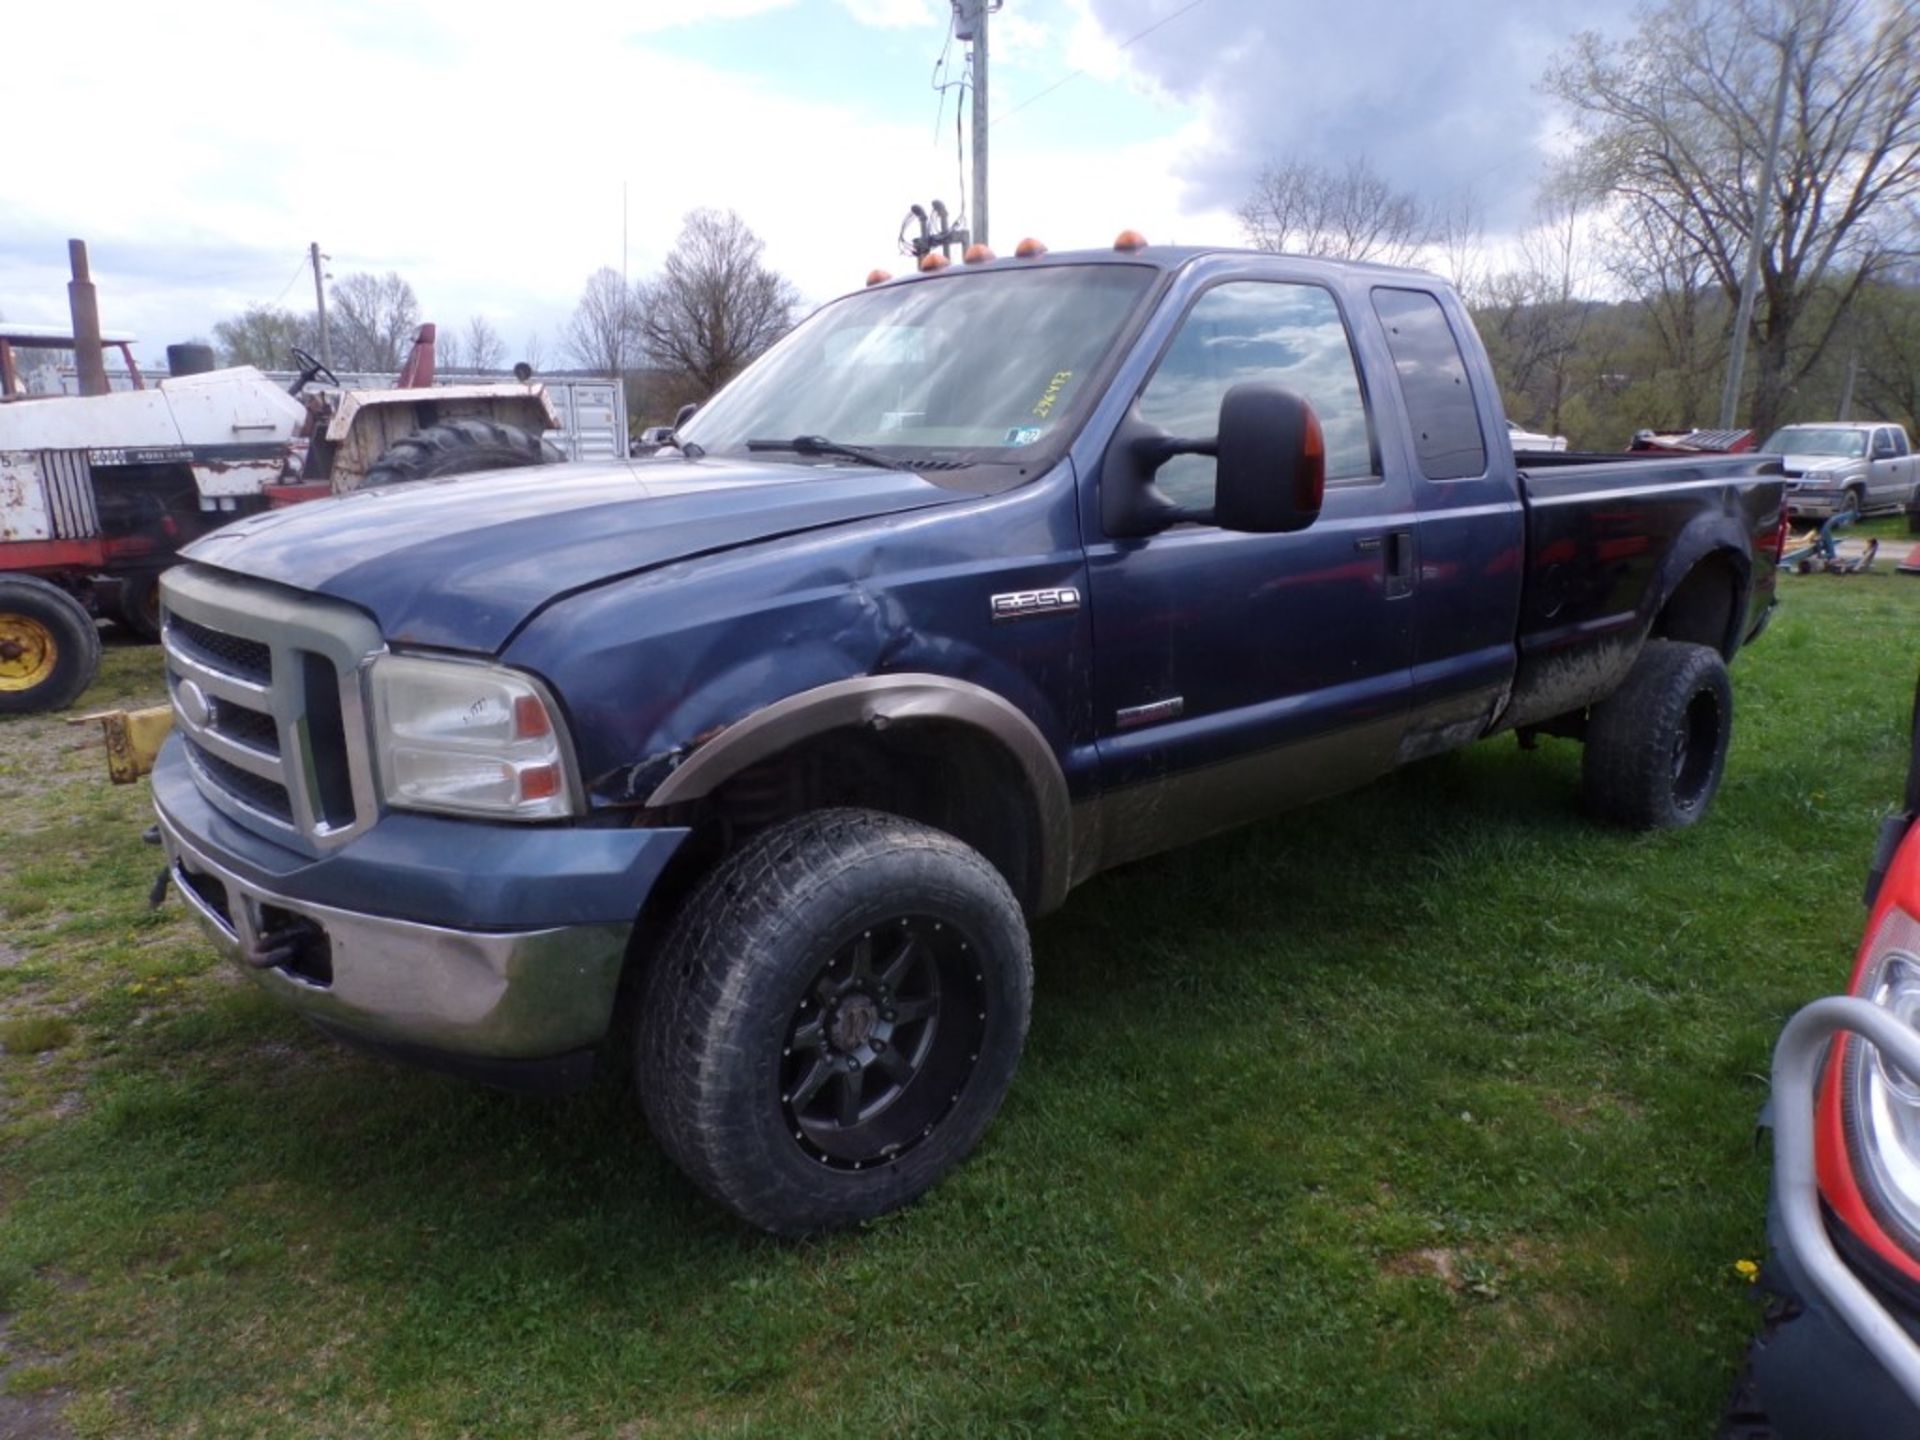 2006 Ford F350, 4WD, Auto, Ext. Cab, Powerstroke Diesel, w/Tuner (in office), Blue, 276,493 Mi, Vin# - Image 3 of 7